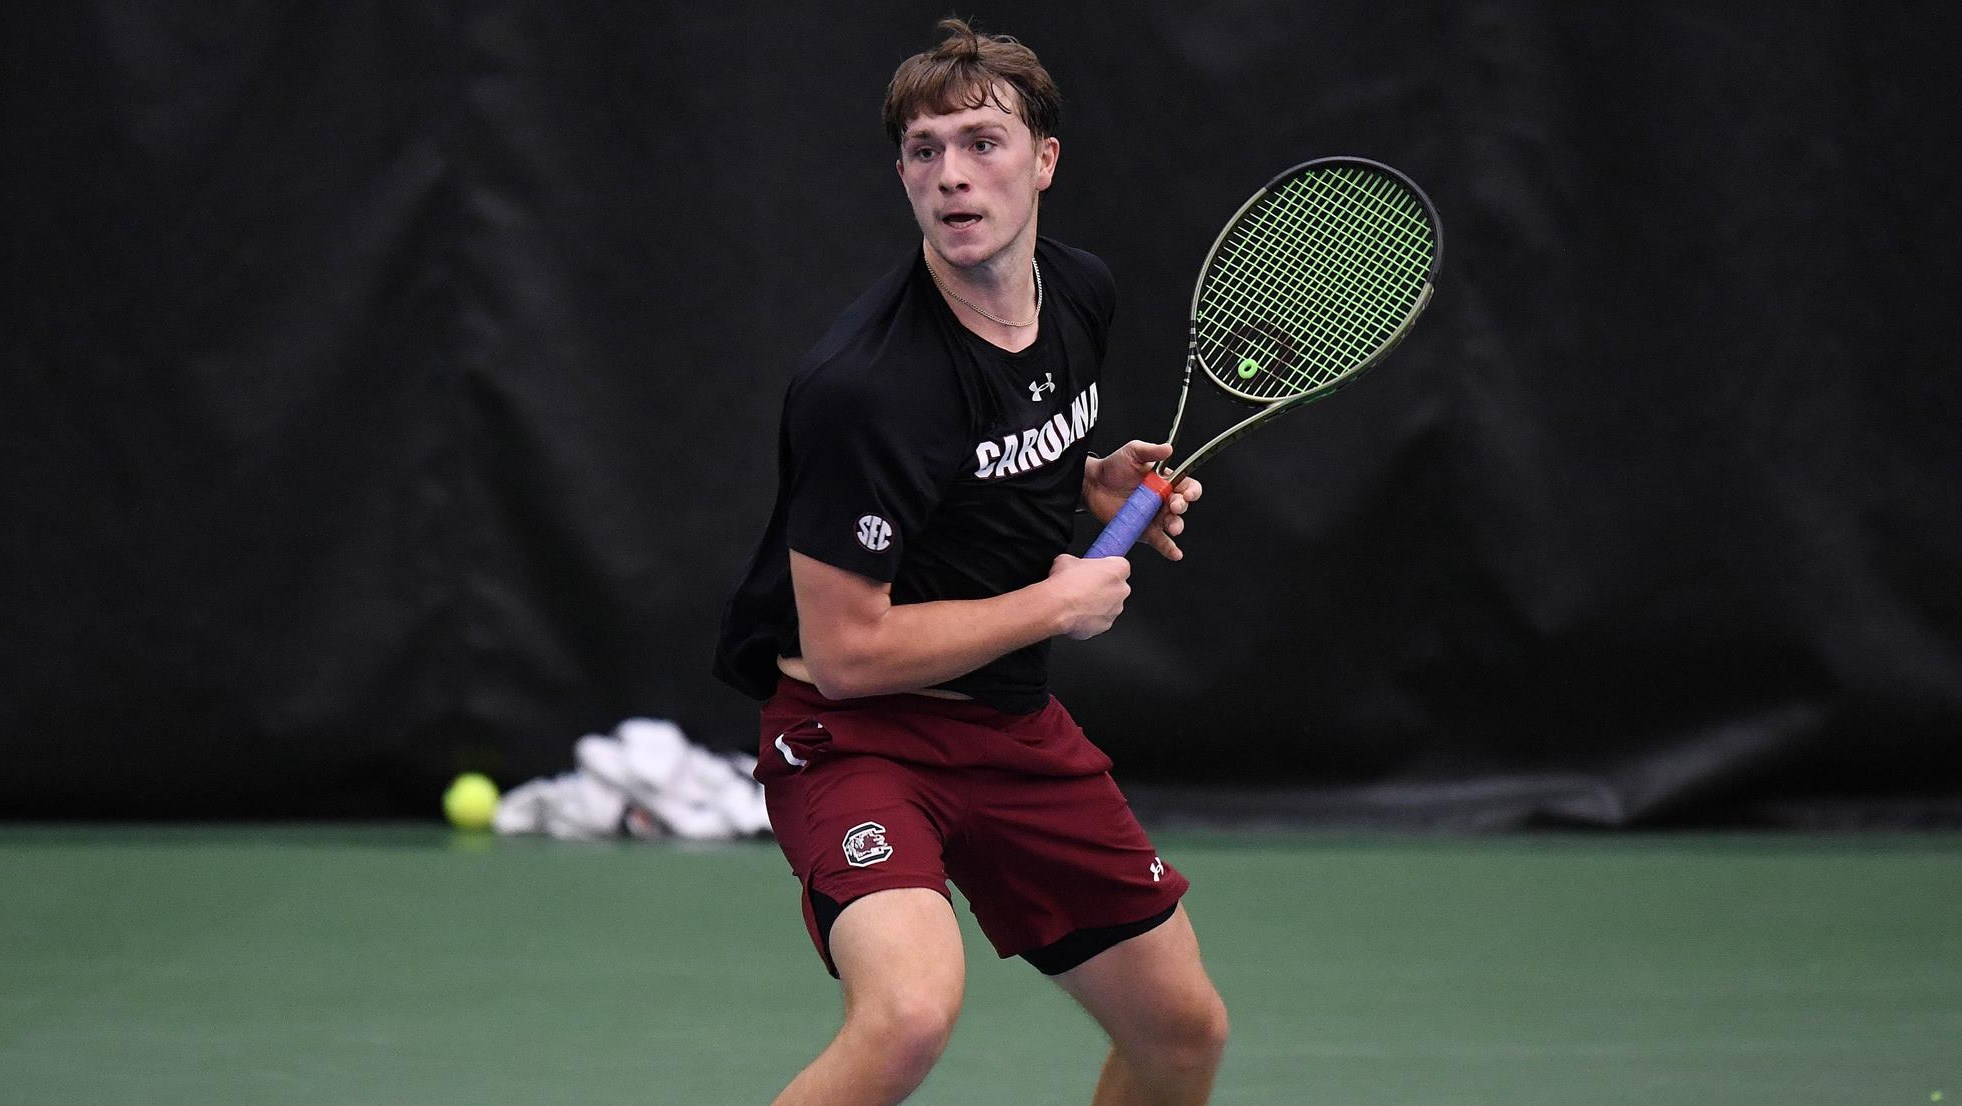 Gamecocks to Face Stanford in First Round of ITA Indoor Nationals